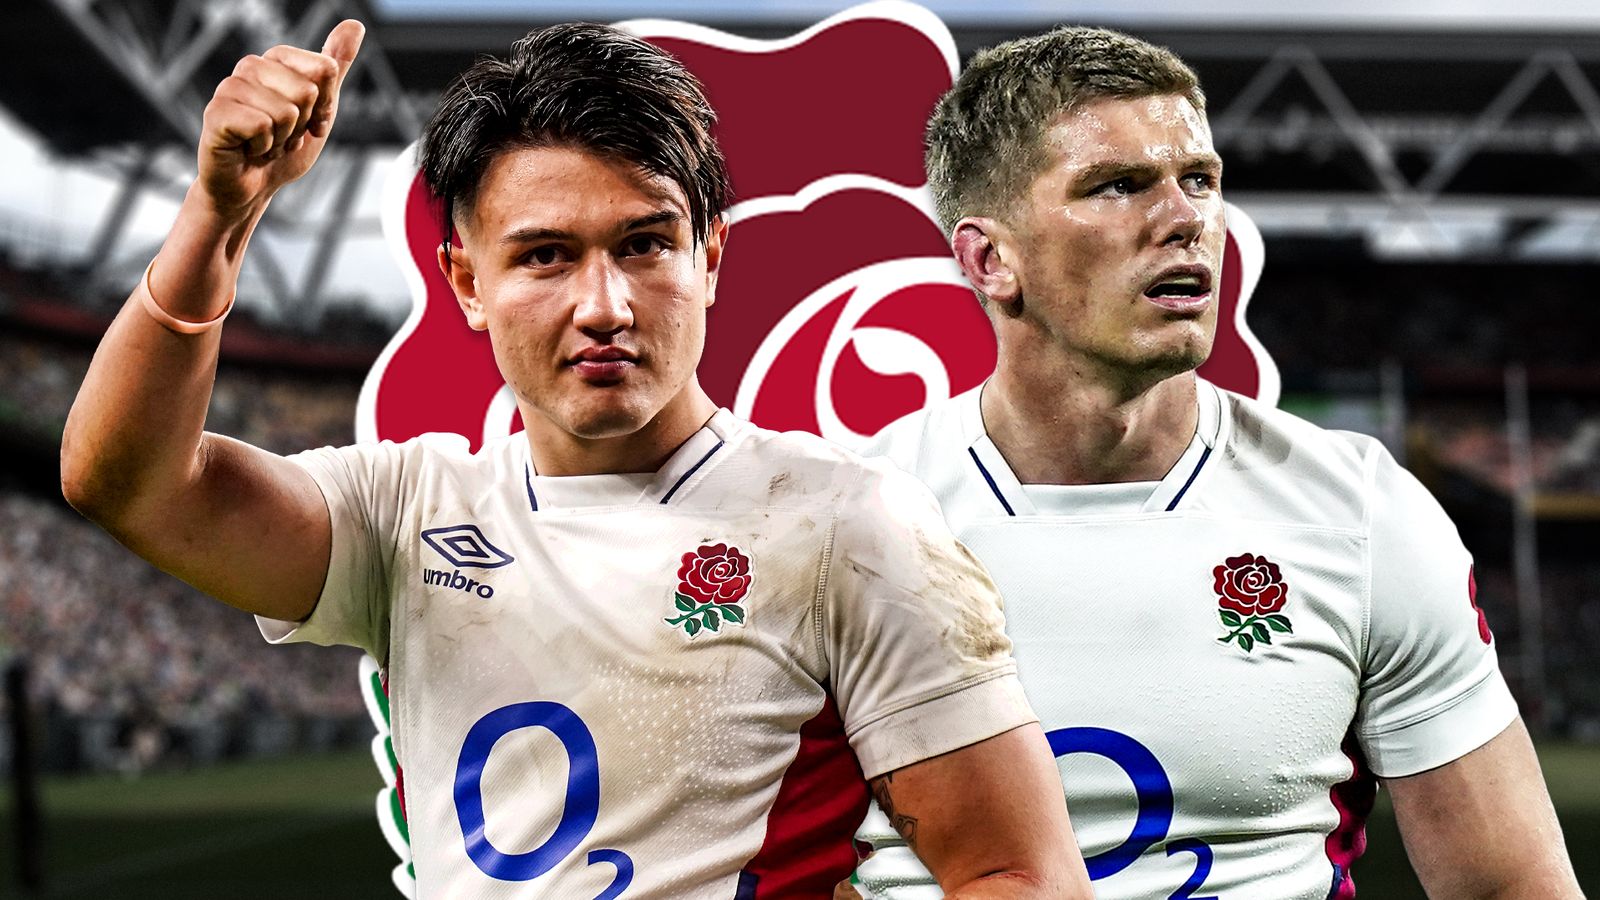 Marcus Smith and Owen Farrell to lead England’s attacking play in summer tour of Australia, live on Sky Sports